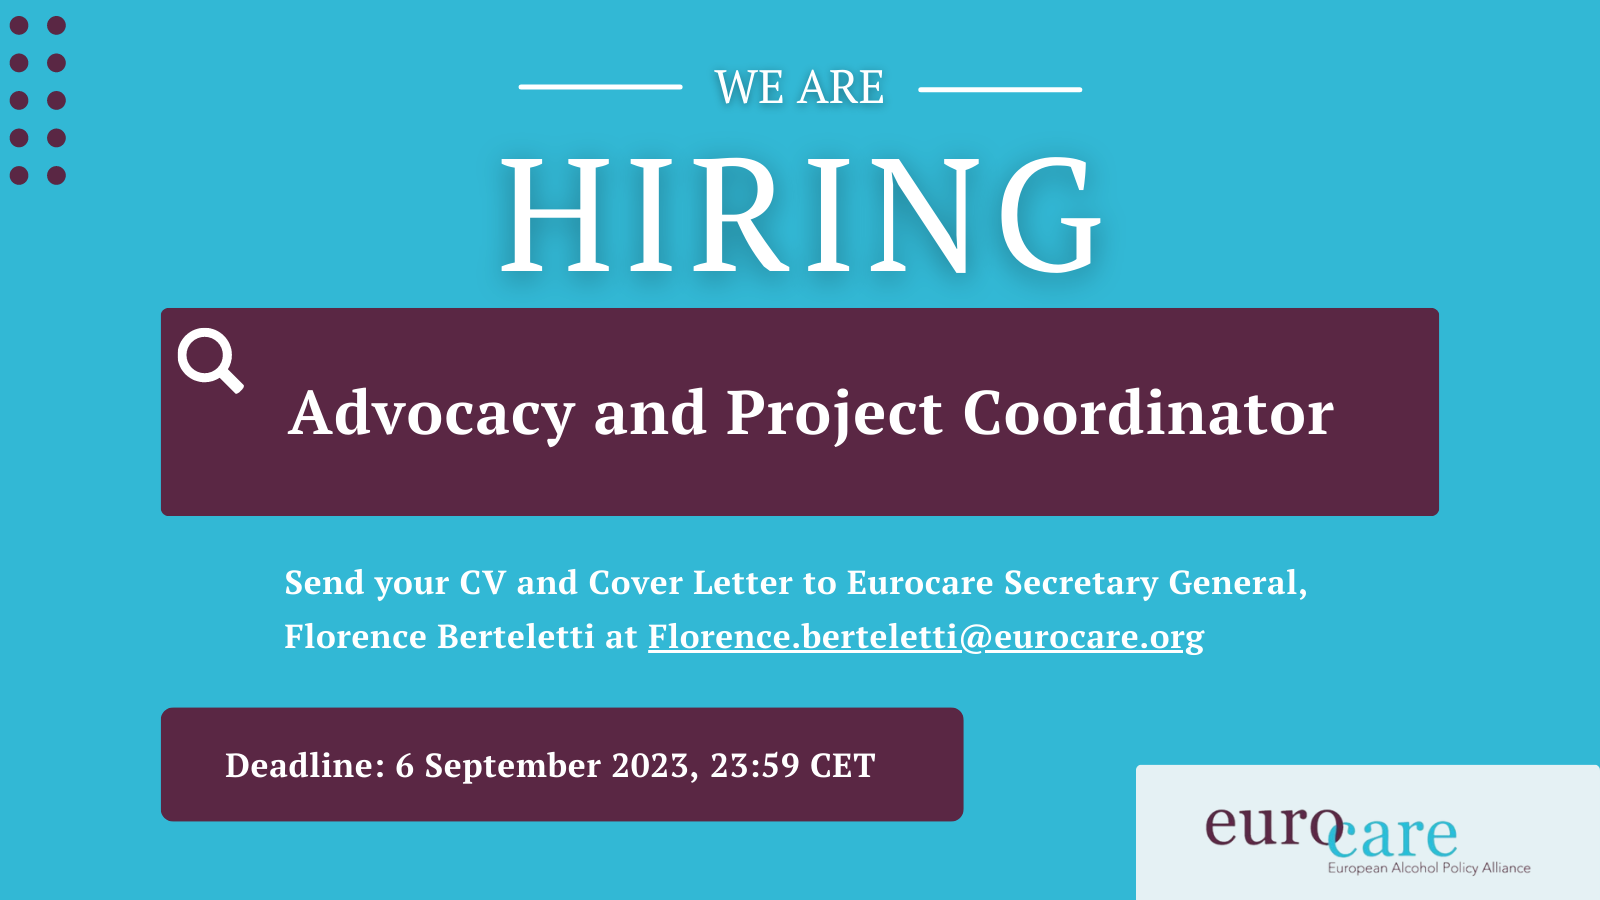 Eurocare is looking for an "Advocacy and Project Coordinator"